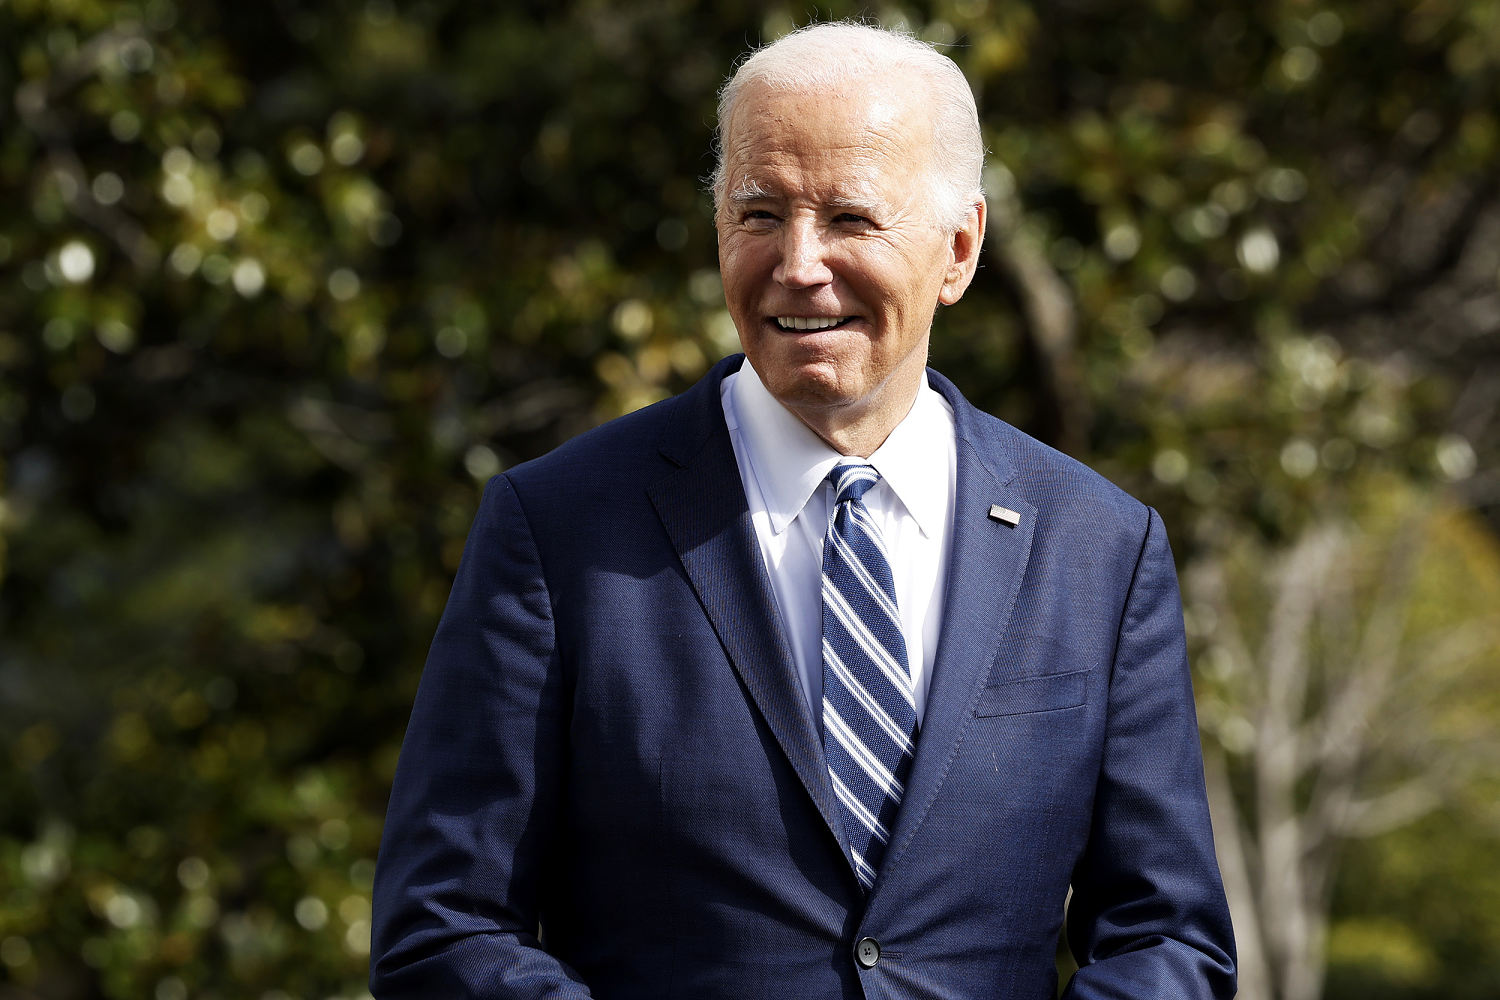 White House doctor says Biden is 'fit for duty' after the president's annual physical